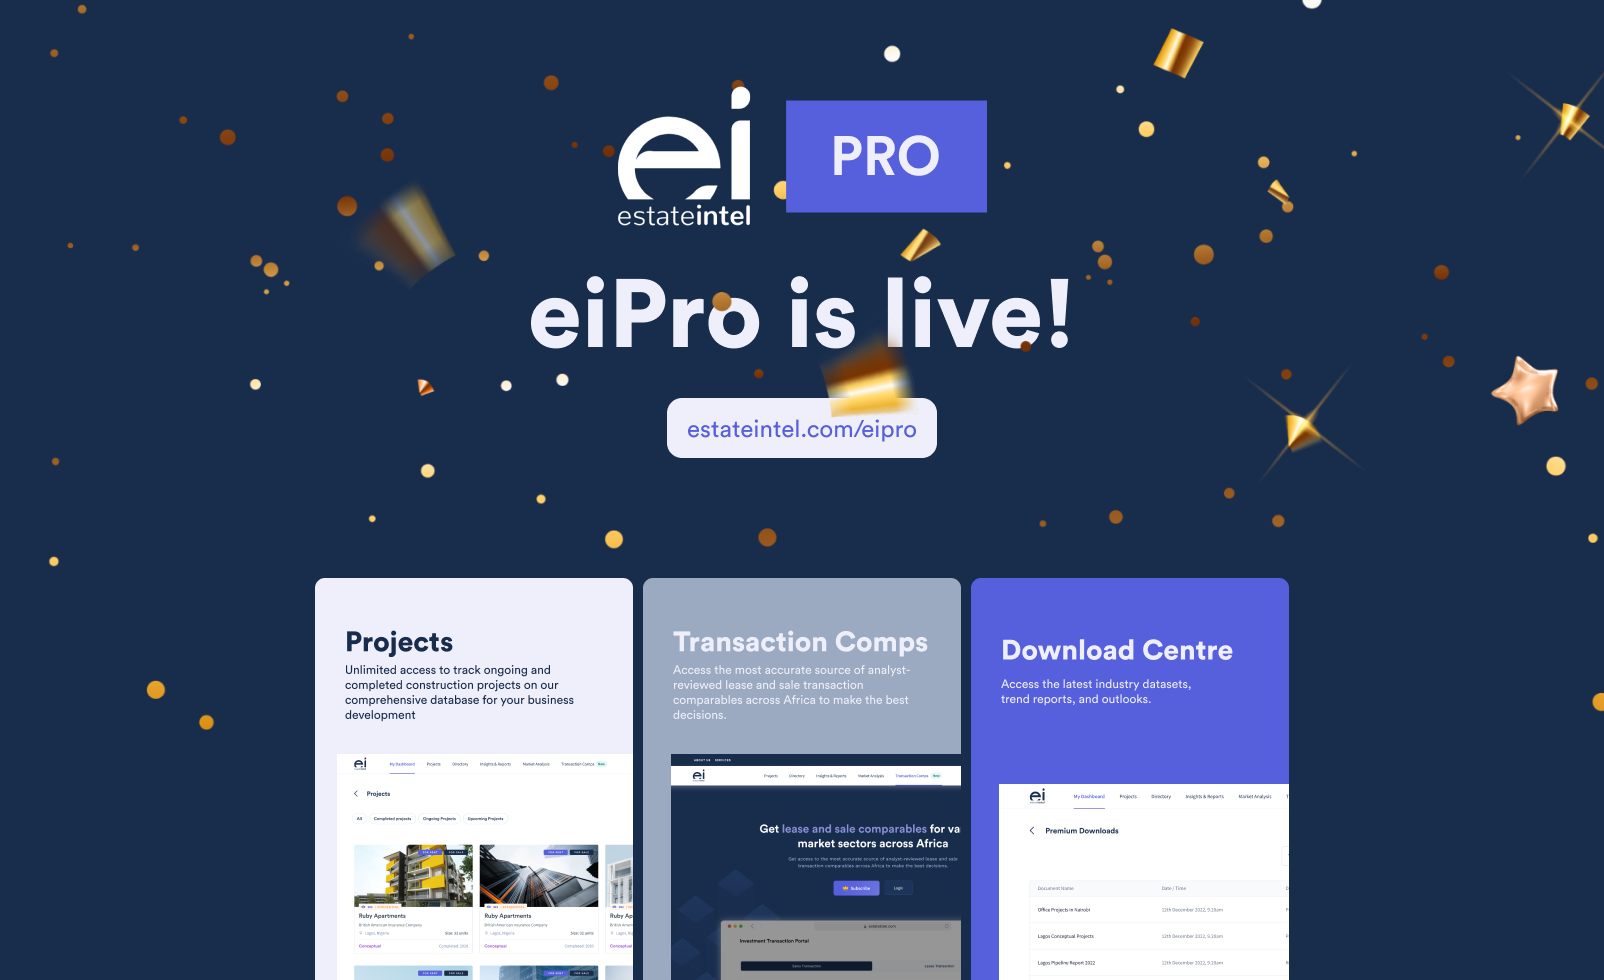 This is ei Pro: More affordable access to real estate data